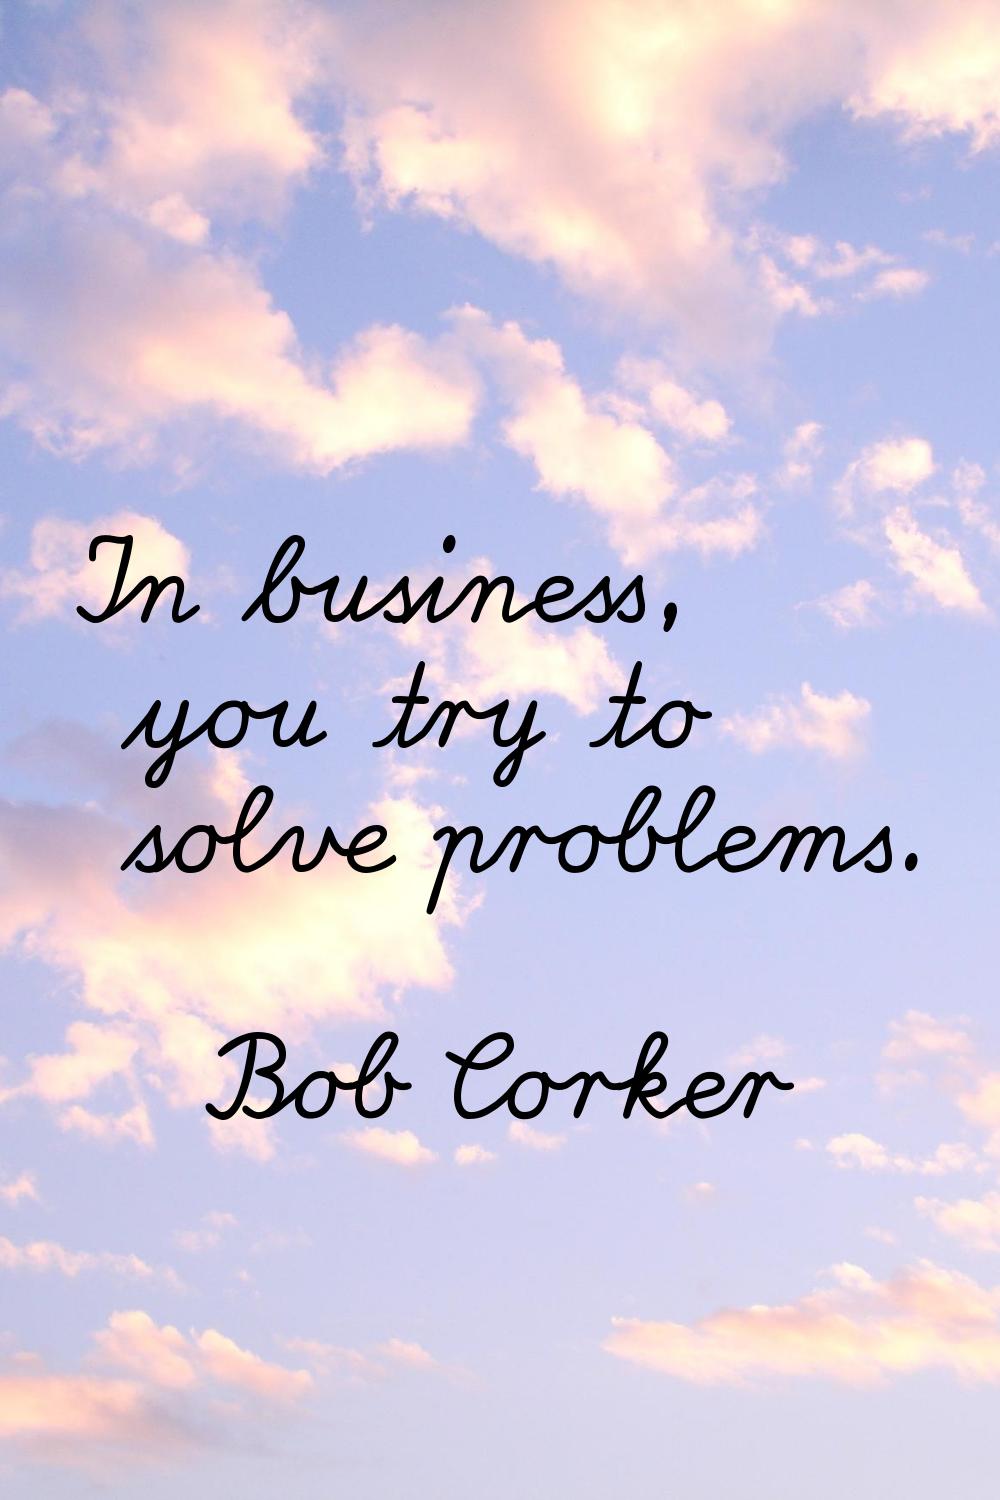 In business, you try to solve problems.